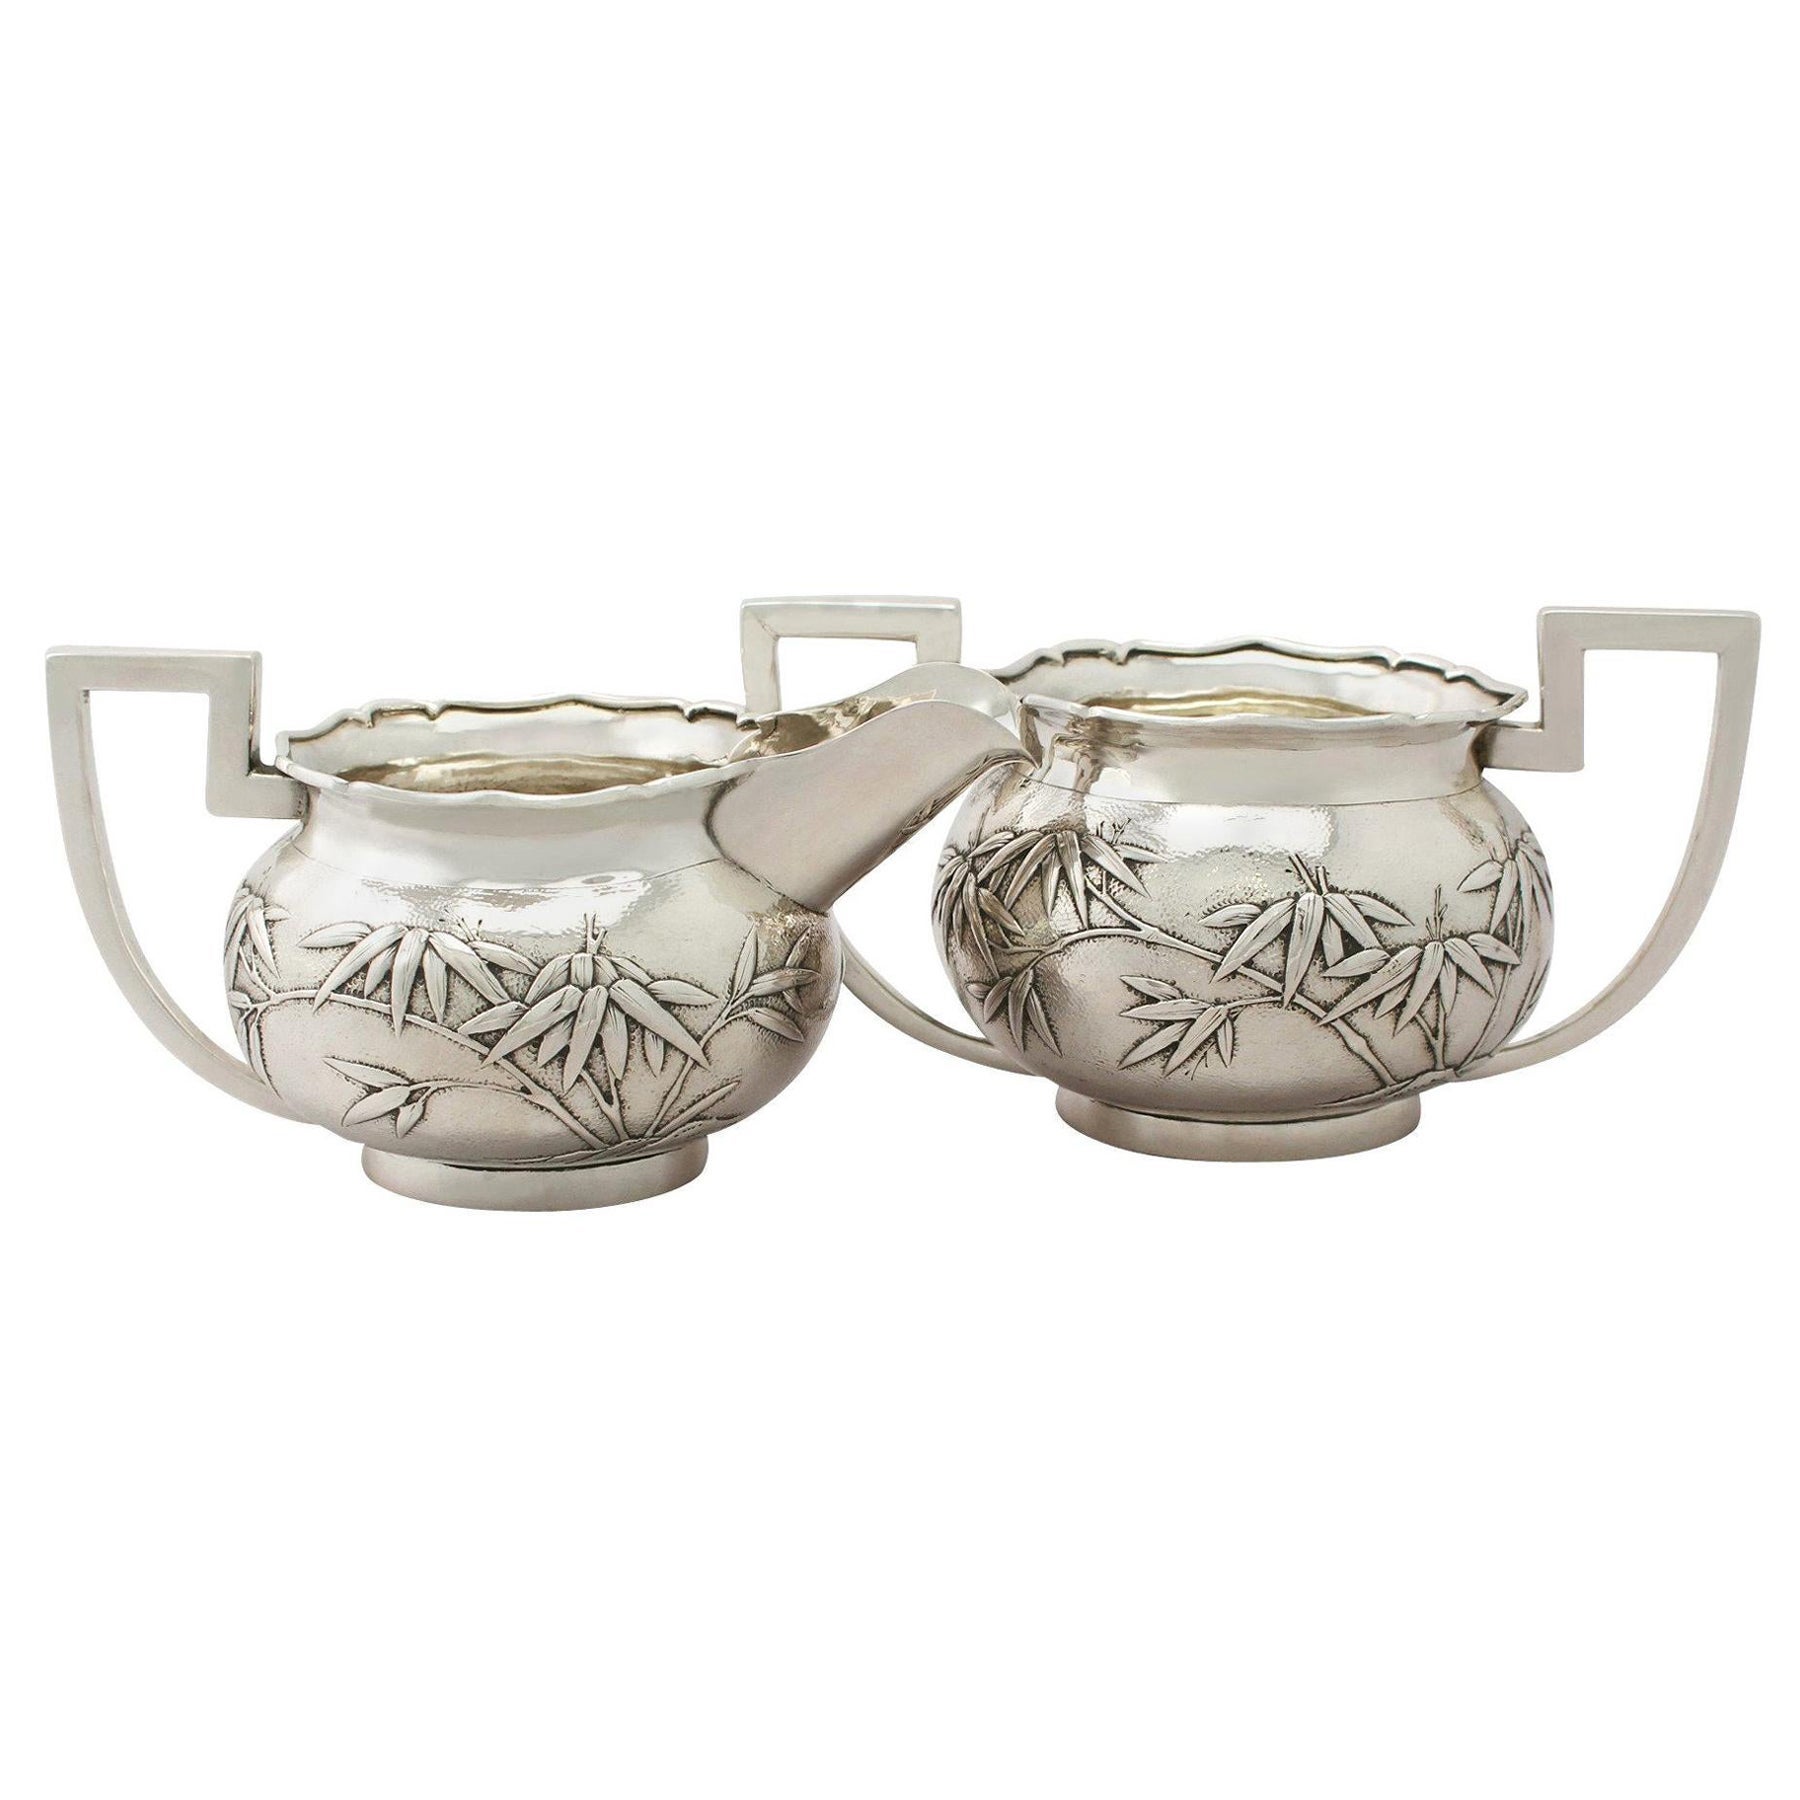 1900s Chinese Export Silver Cream Jug / Creamer and Sugar Bowl For Sale